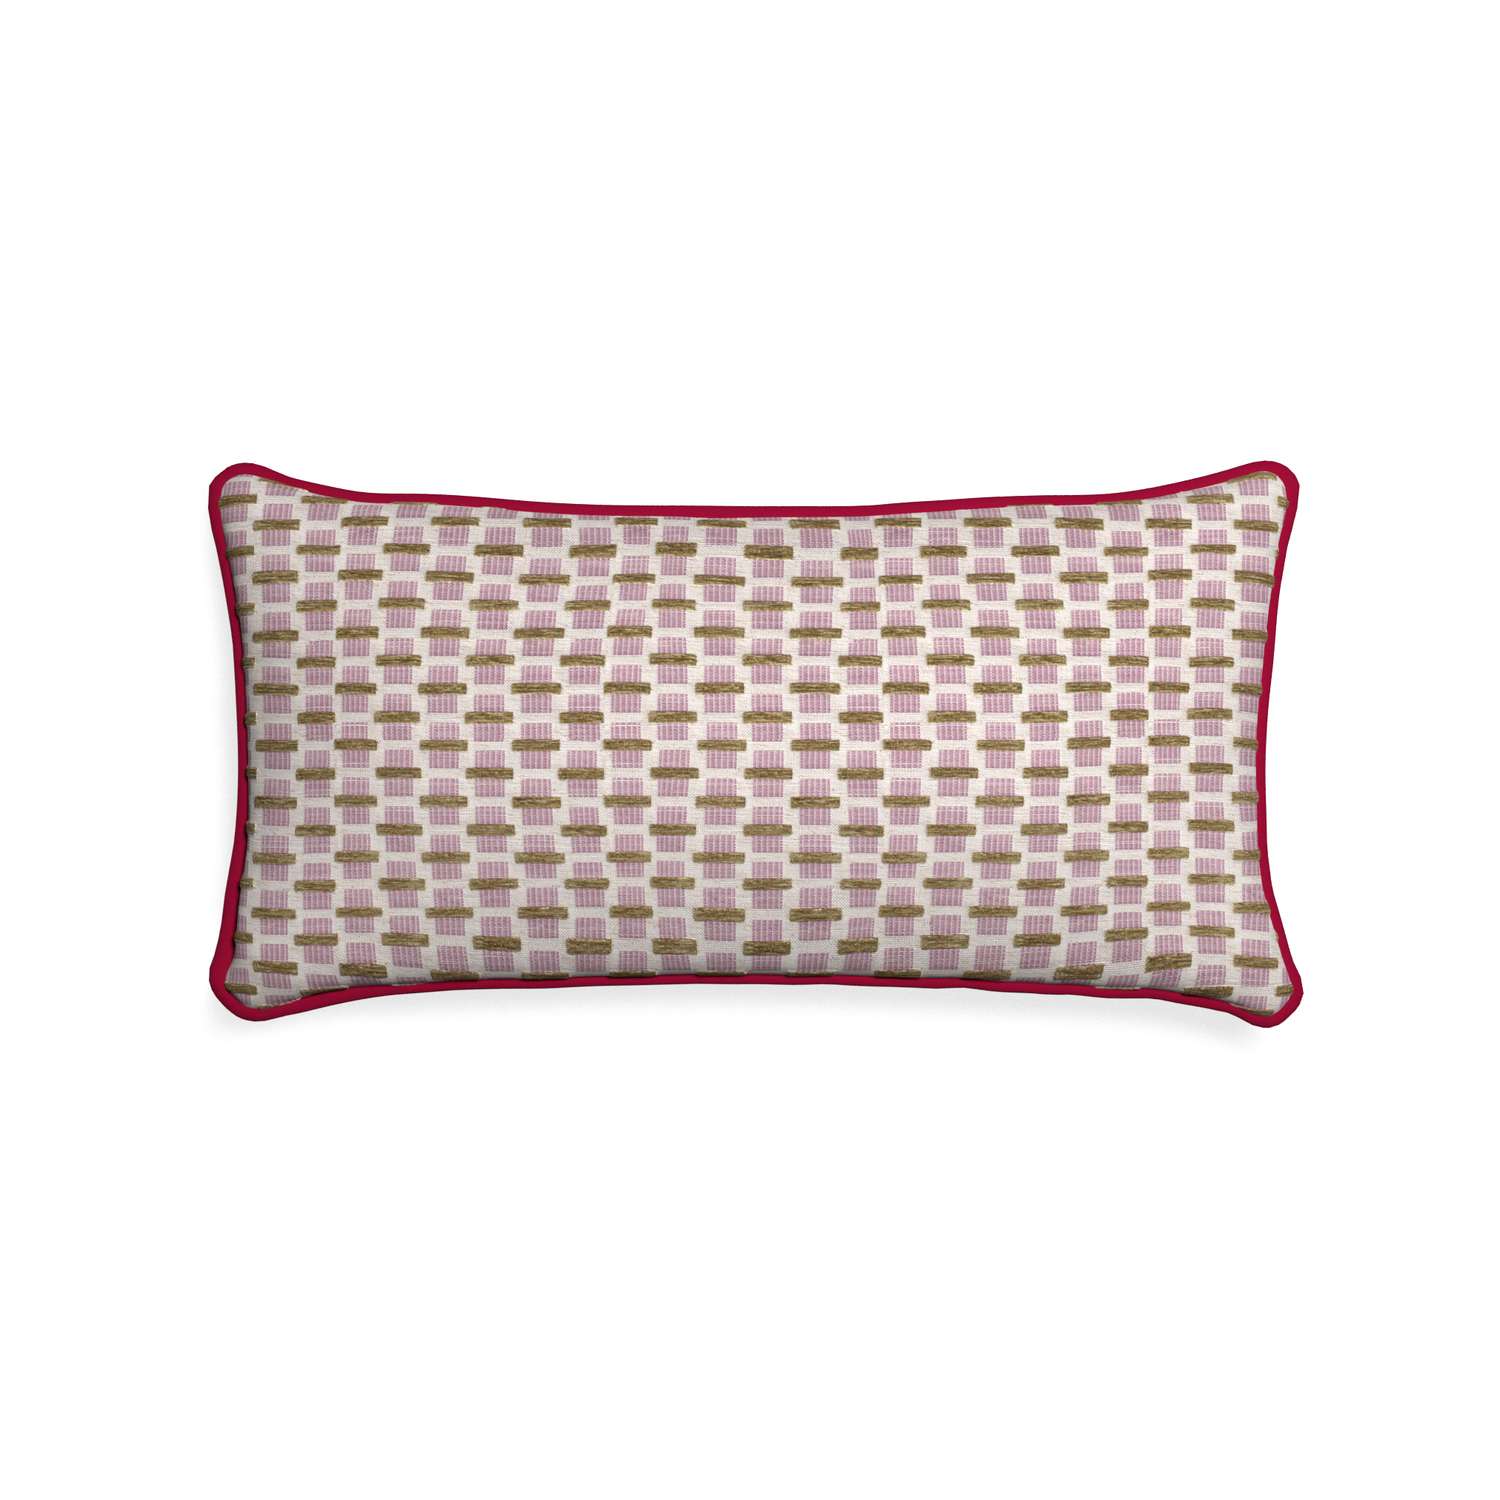 Midi-lumbar willow orchid custom pink geometric chenillepillow with raspberry piping on white background